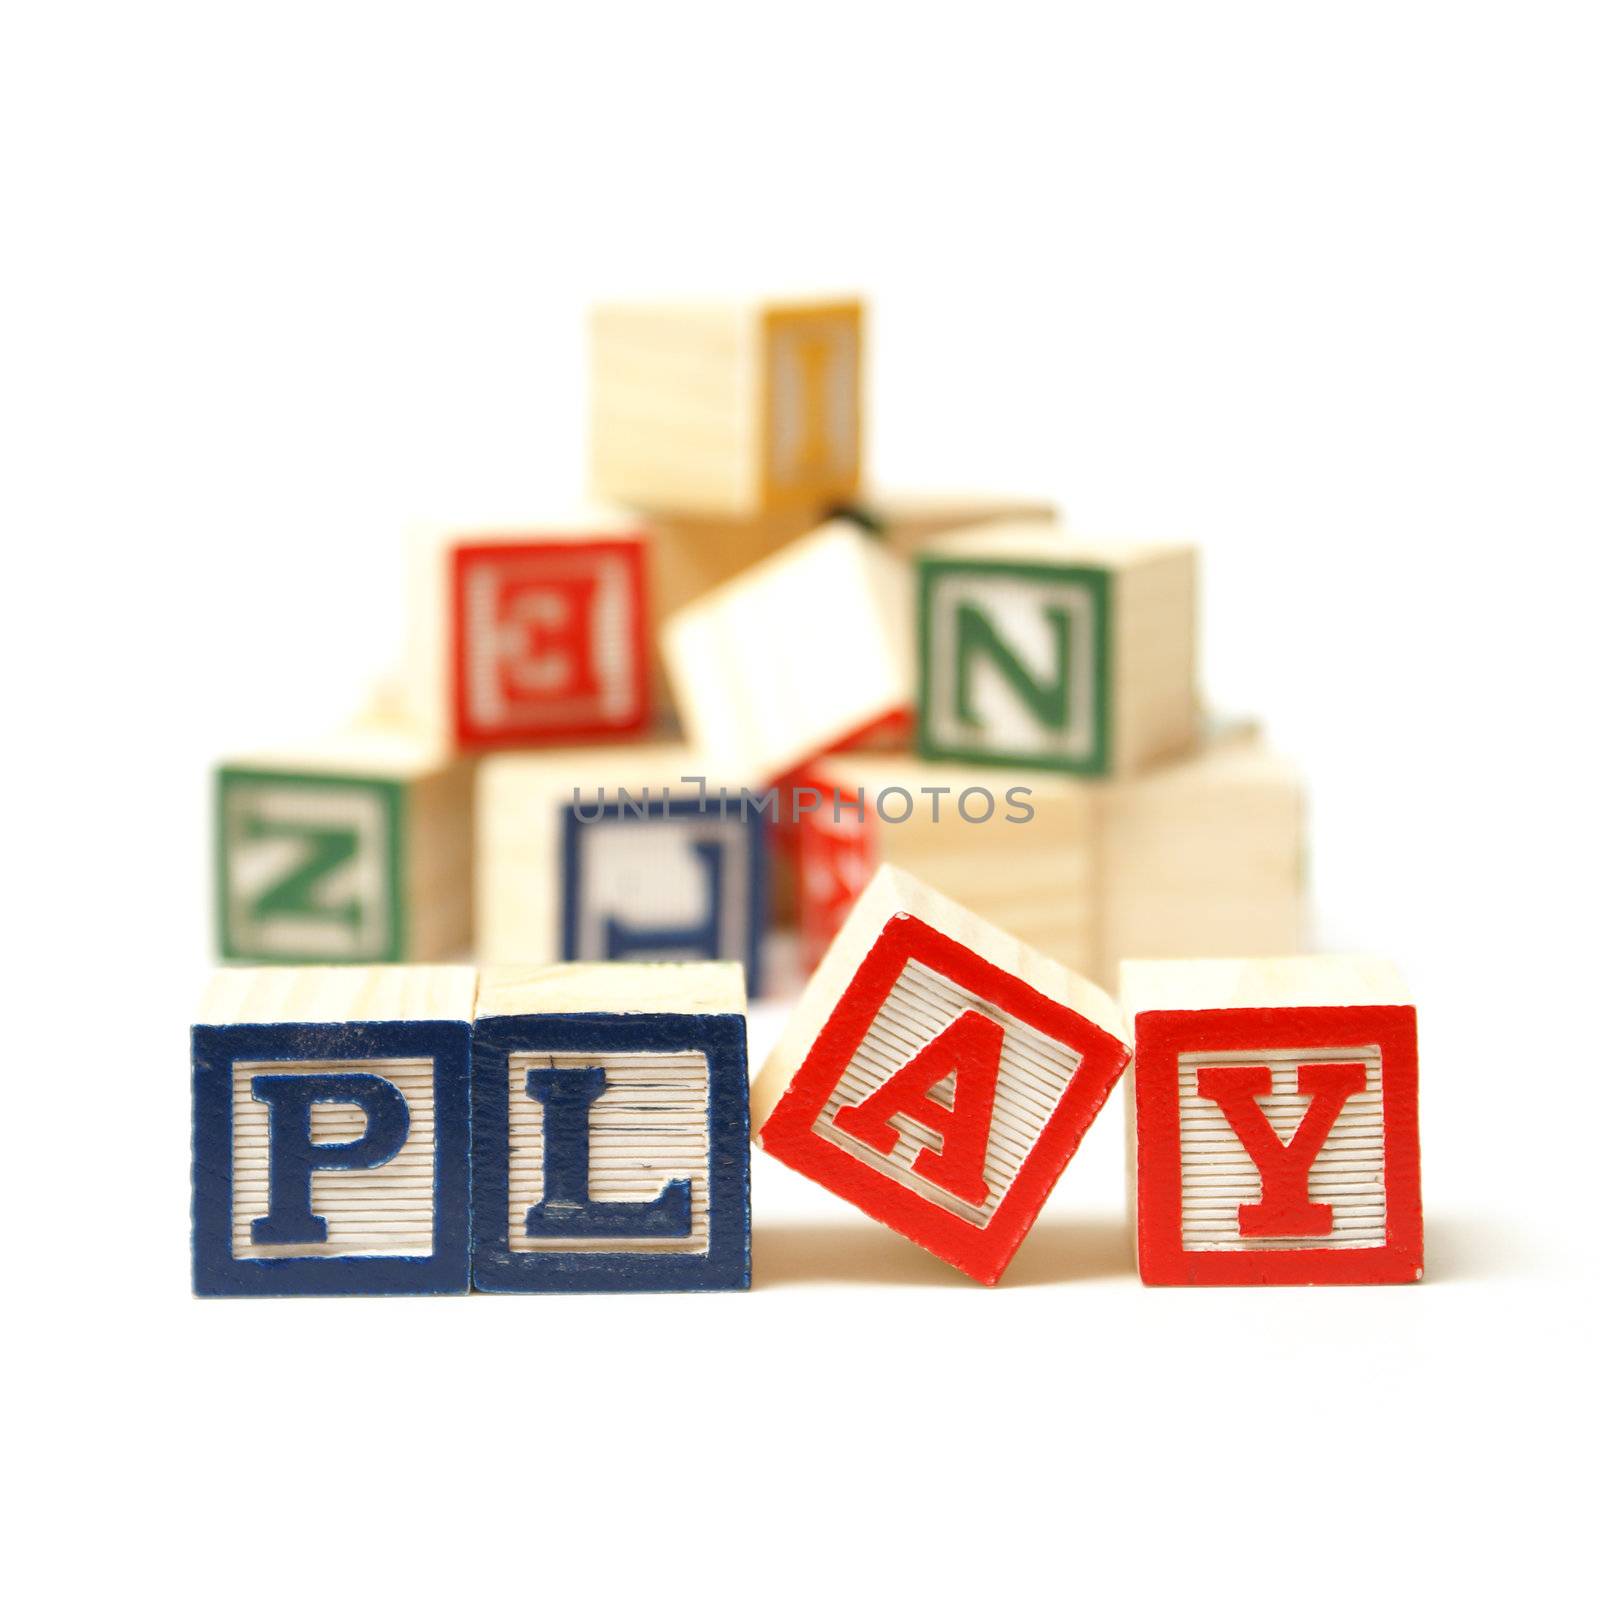 The word play has been spelled out while playing with toy blocks.